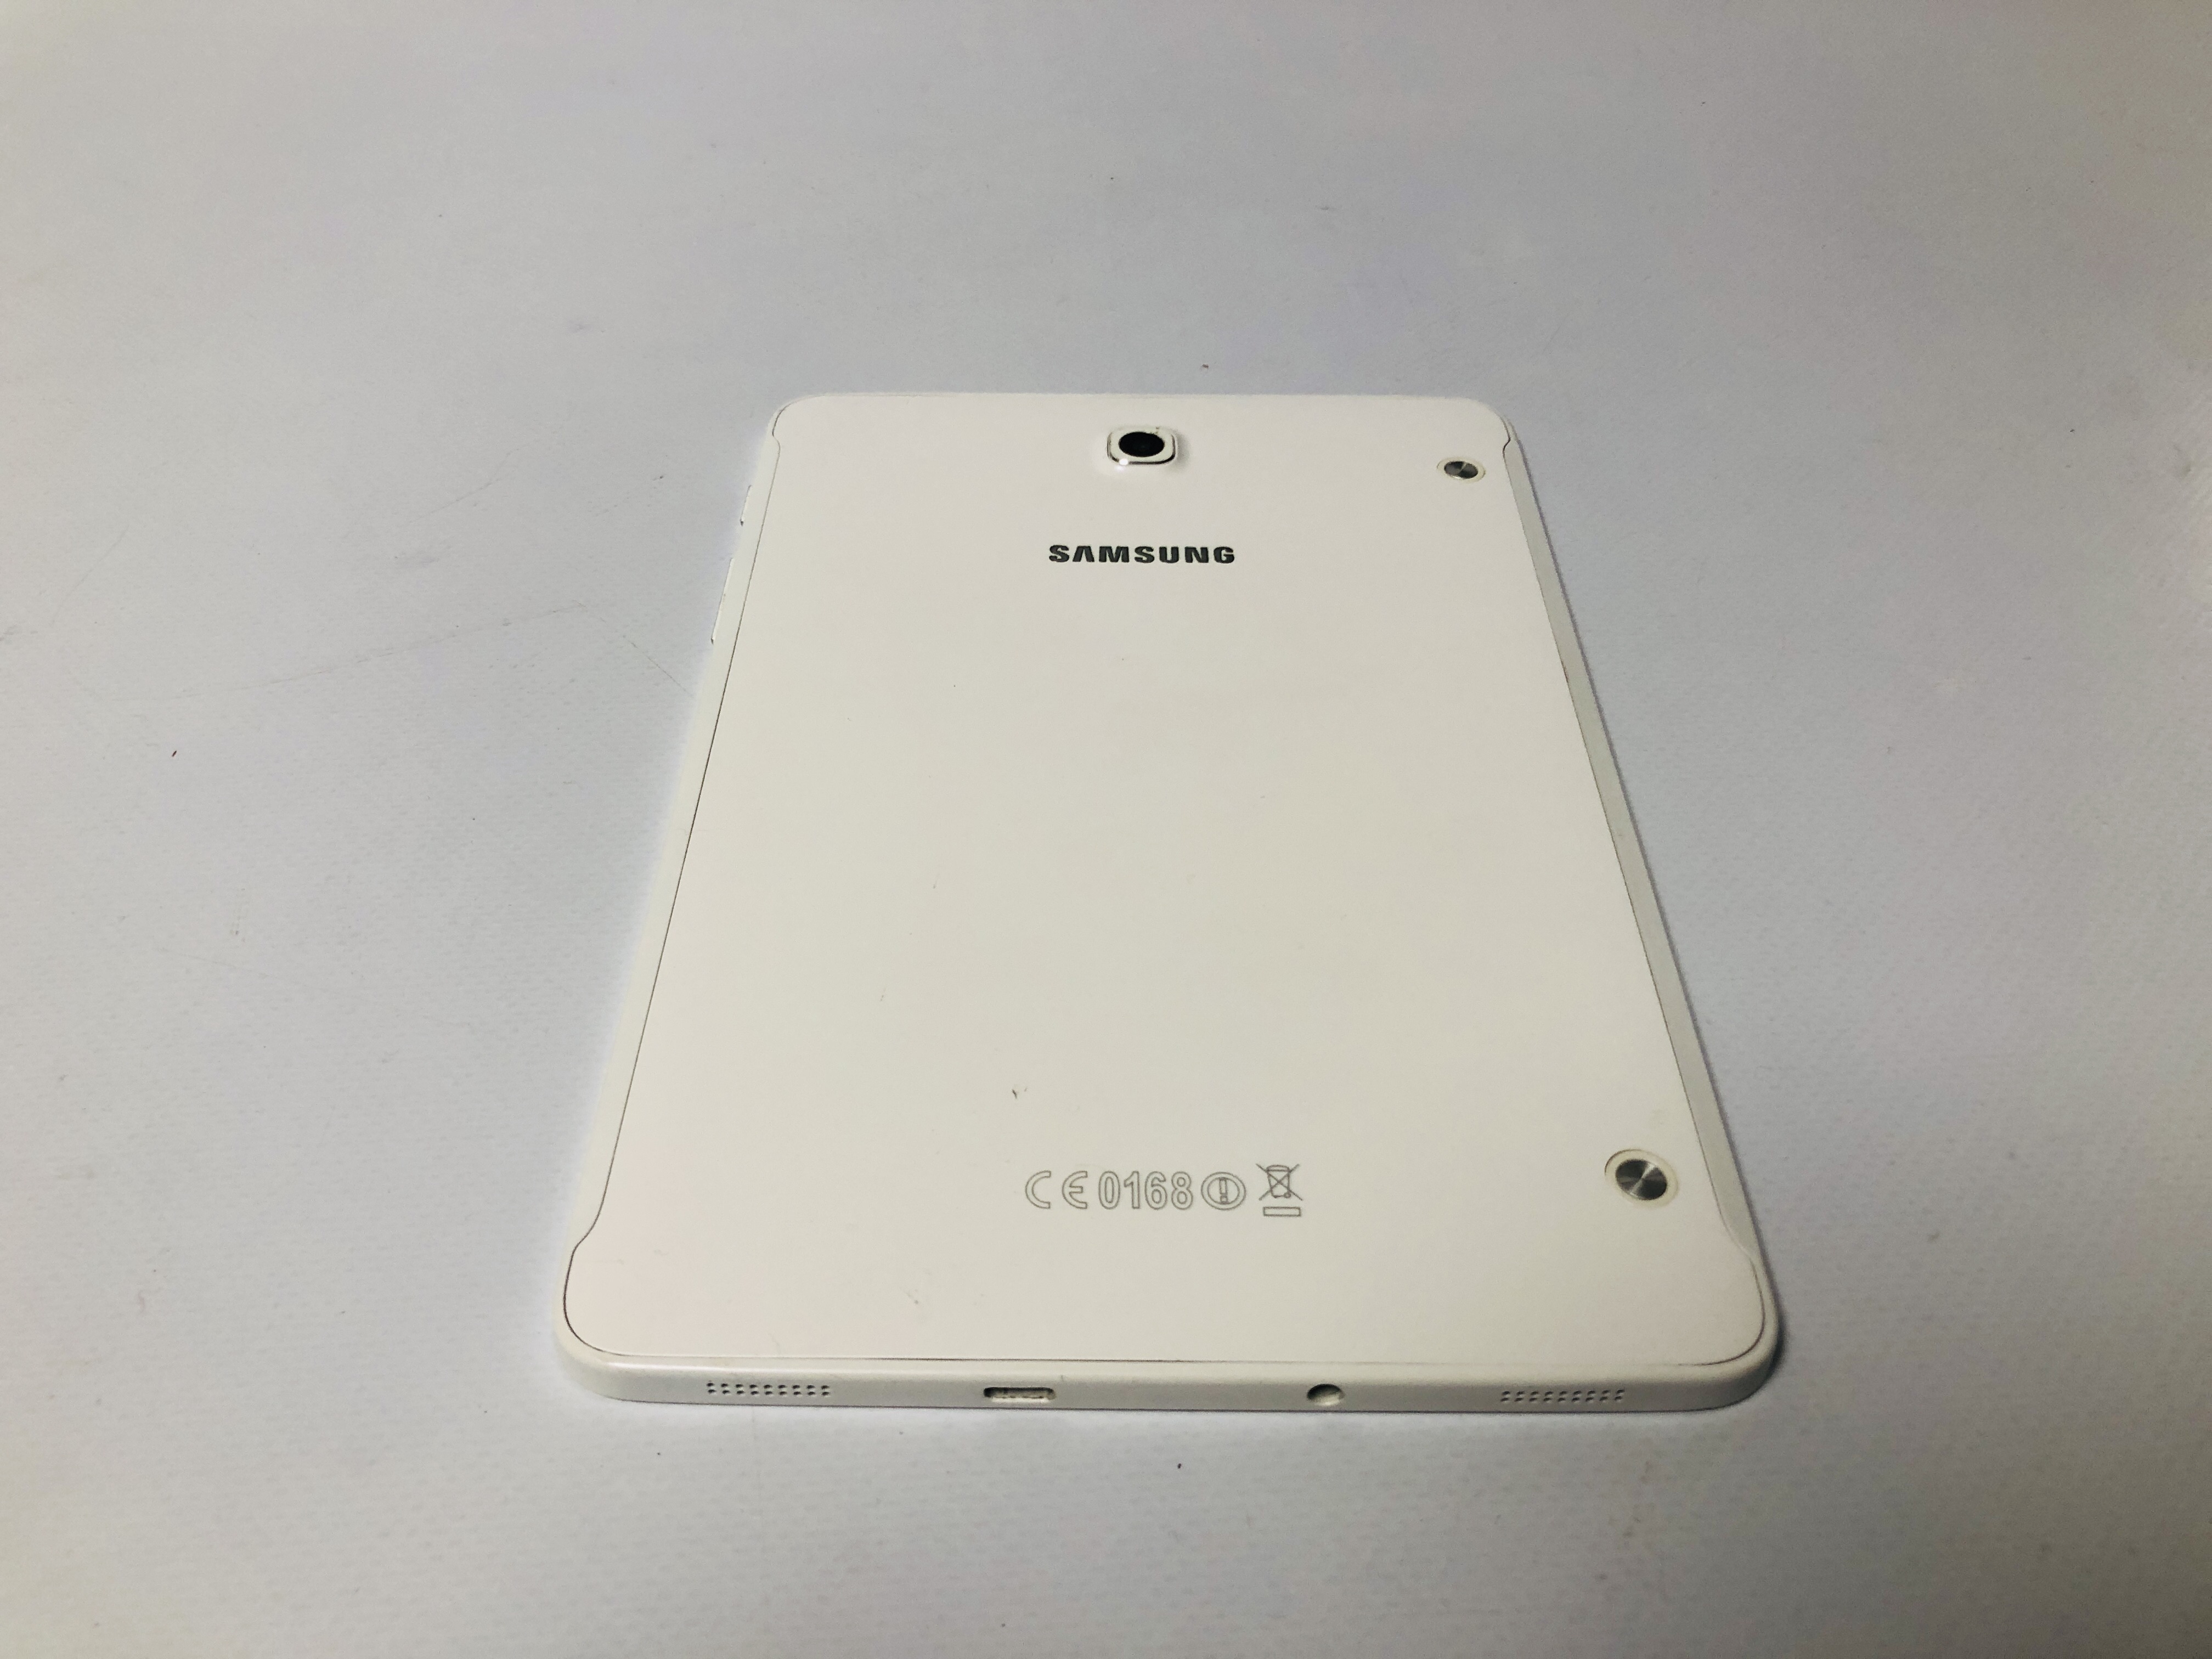 SAMSUNG GALAXY TAB S2 TABLET MODEL SM - T710 - SOLD AS SEEN - Image 4 of 6